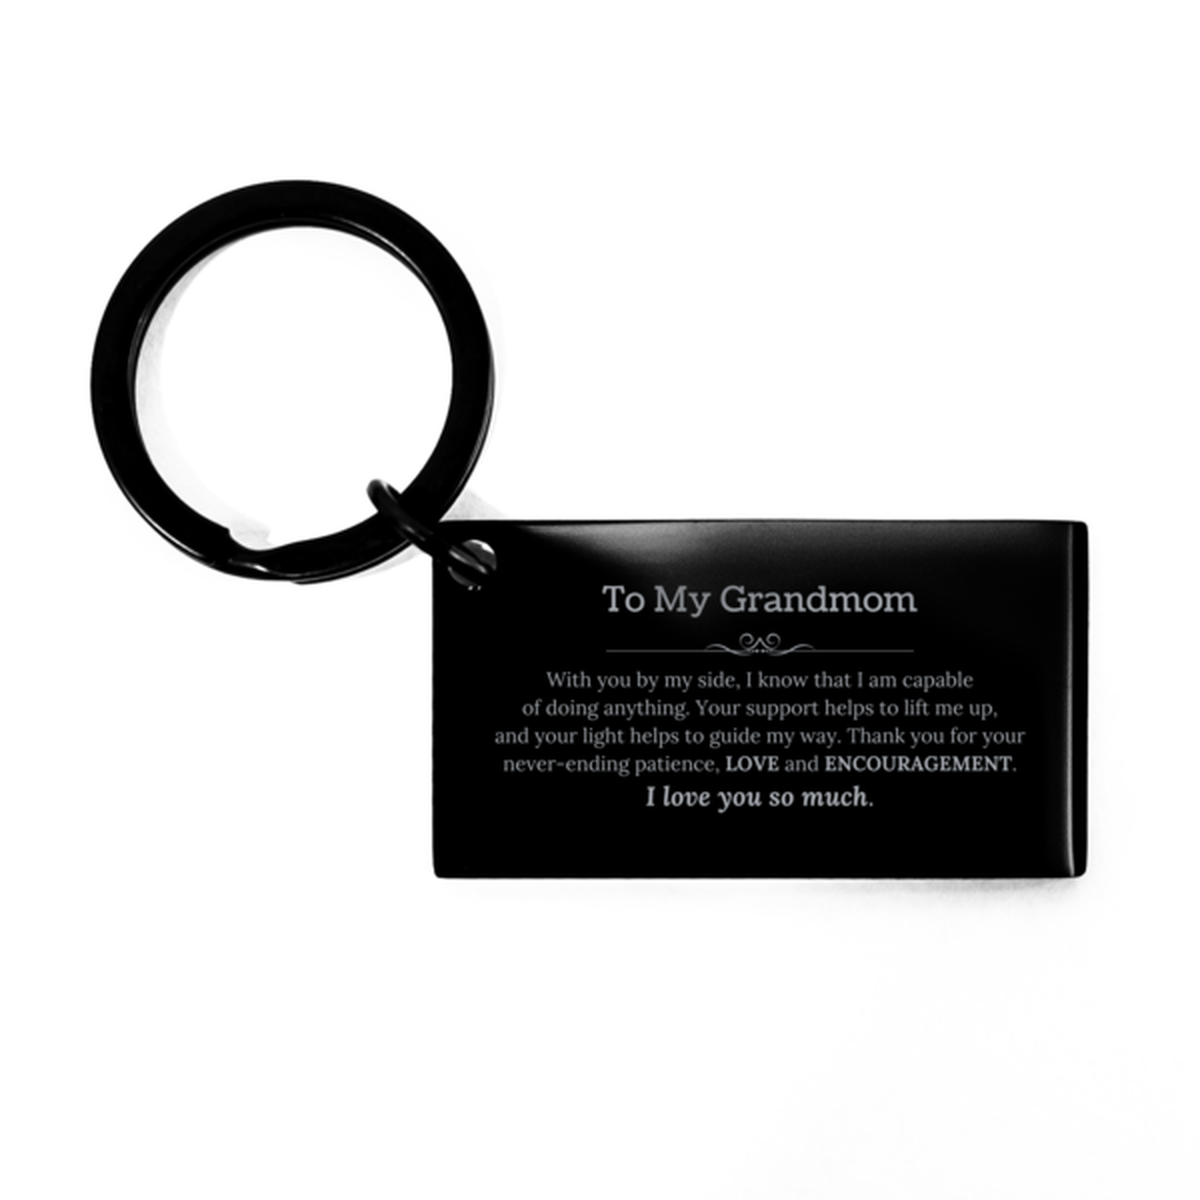 Appreciation Grandmom Keychain Gifts, To My Grandmom Birthday Christmas Wedding Keepsake Gifts for Grandmom With you by my side, I know that I am capable of doing anything. I love you so much